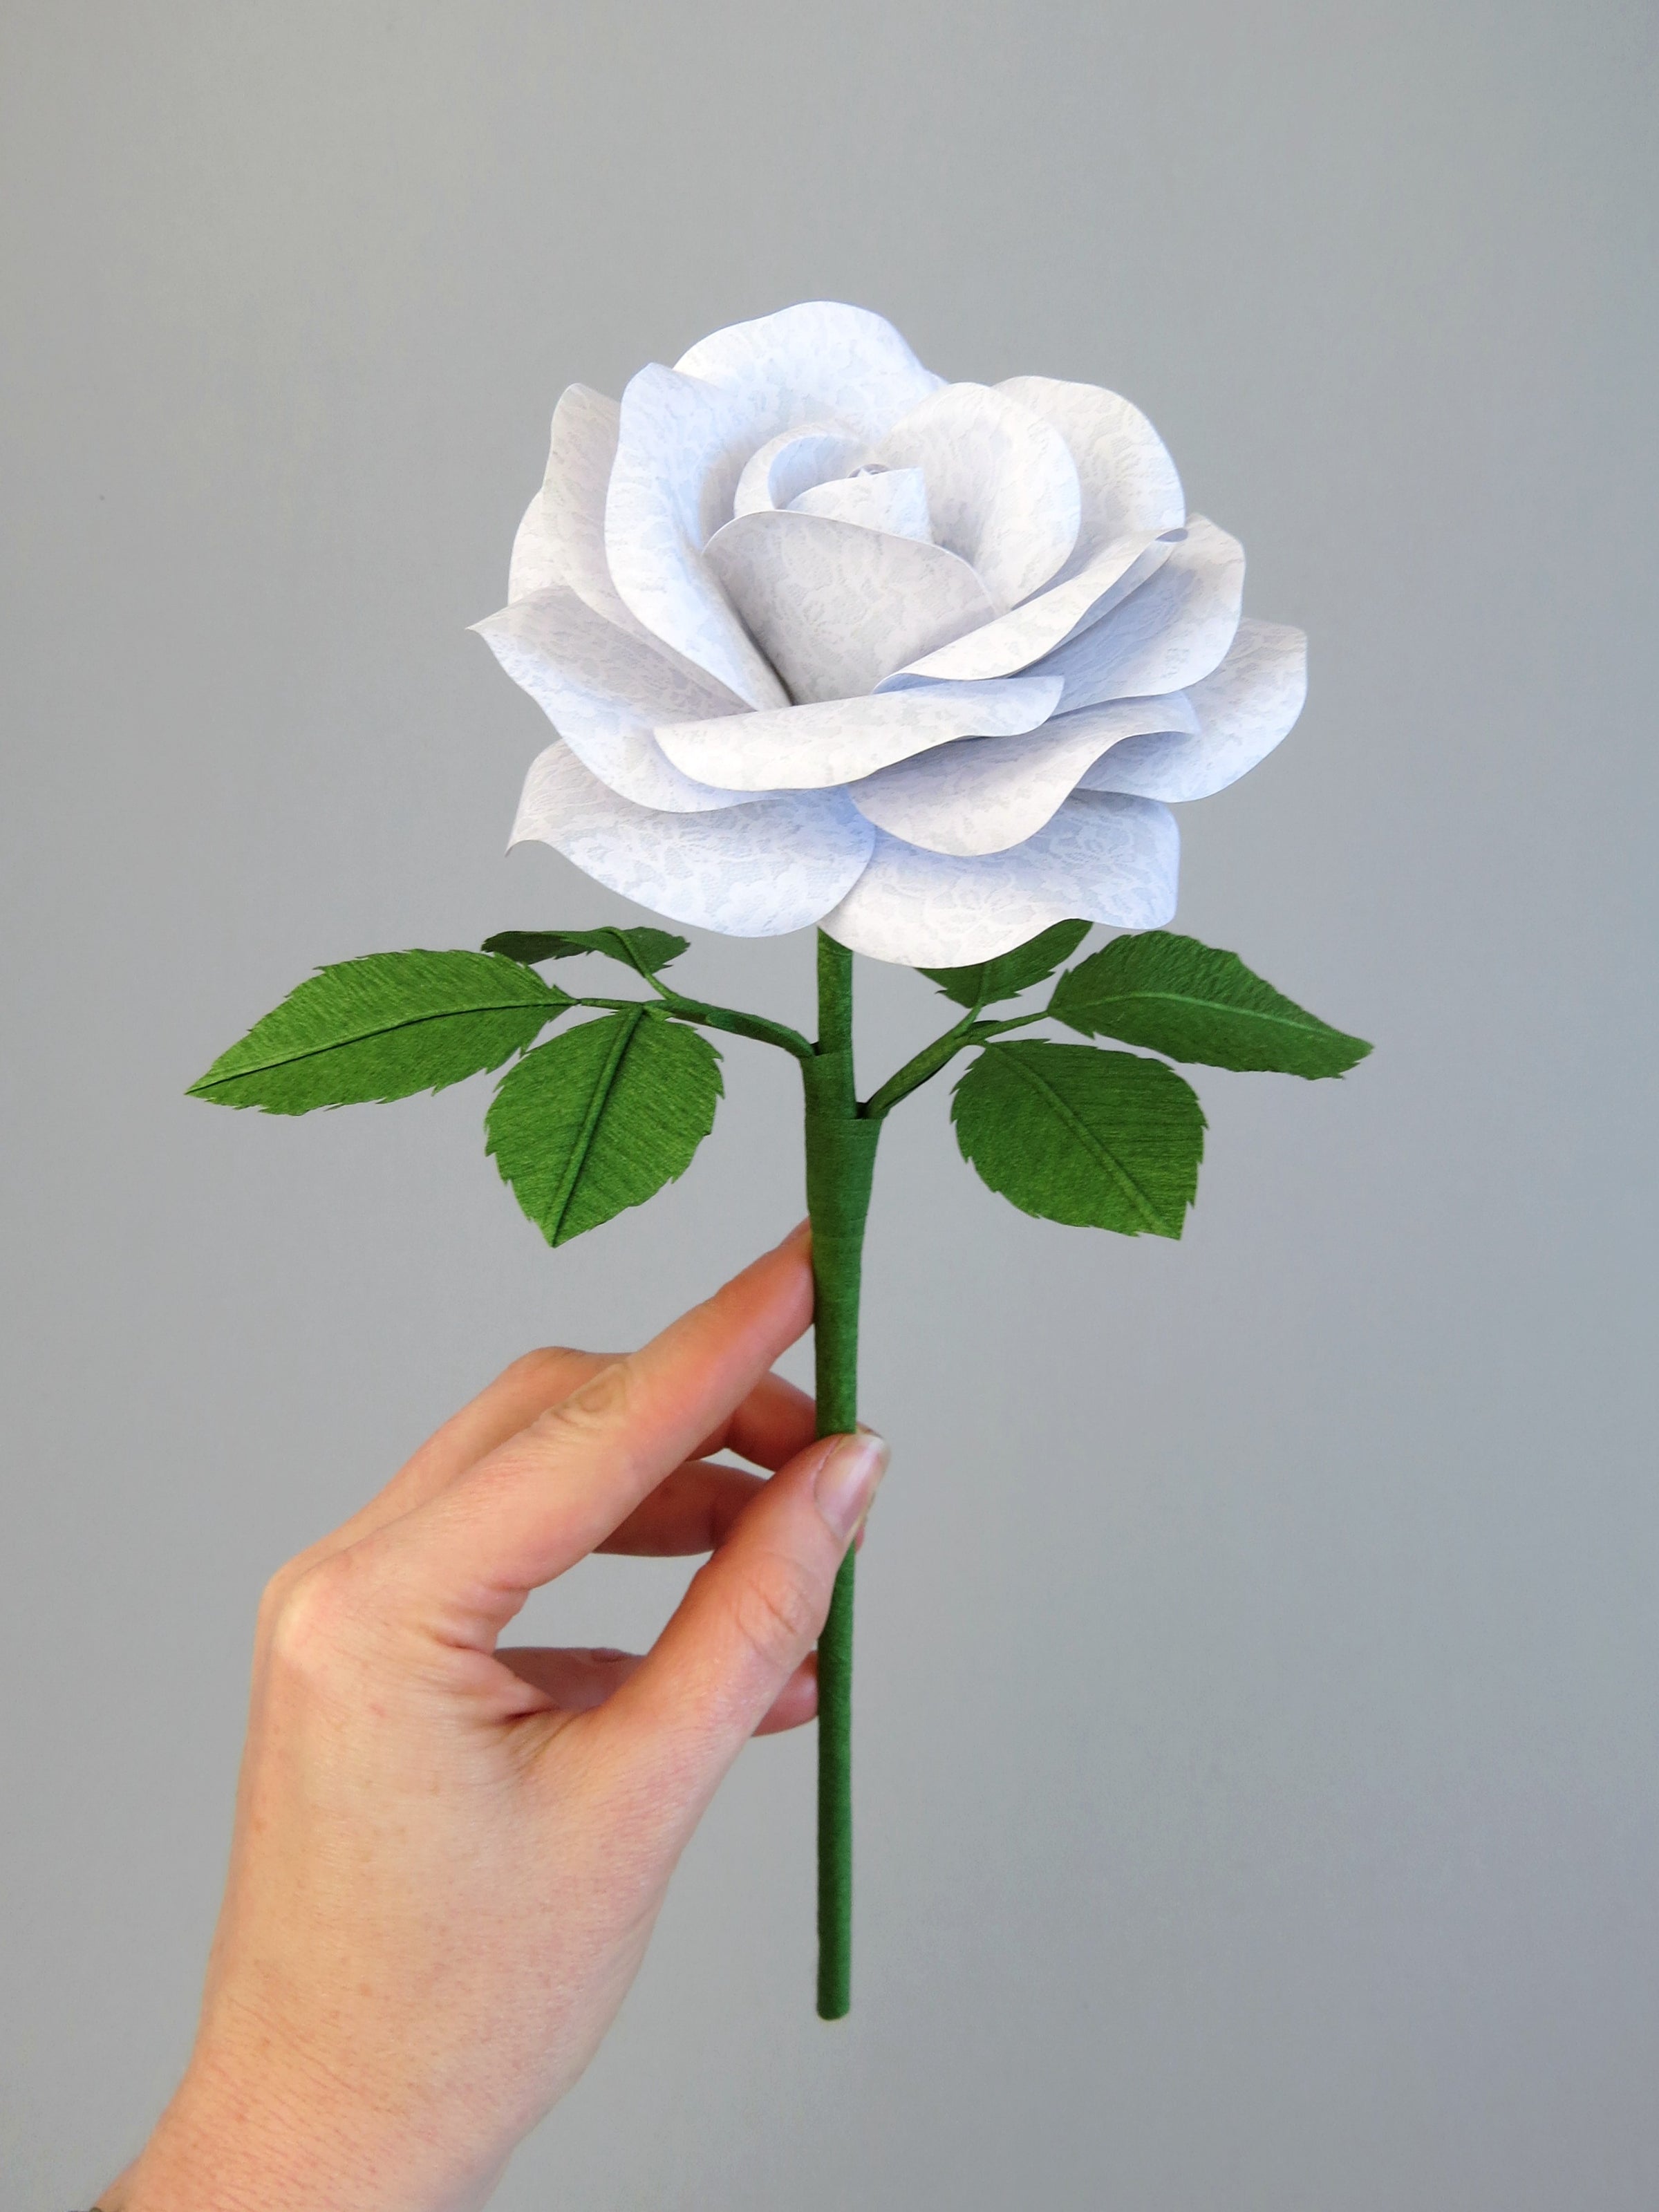 Pale white hand delicately holding the stem of a white lace printed paper rose with six ivy green leaves